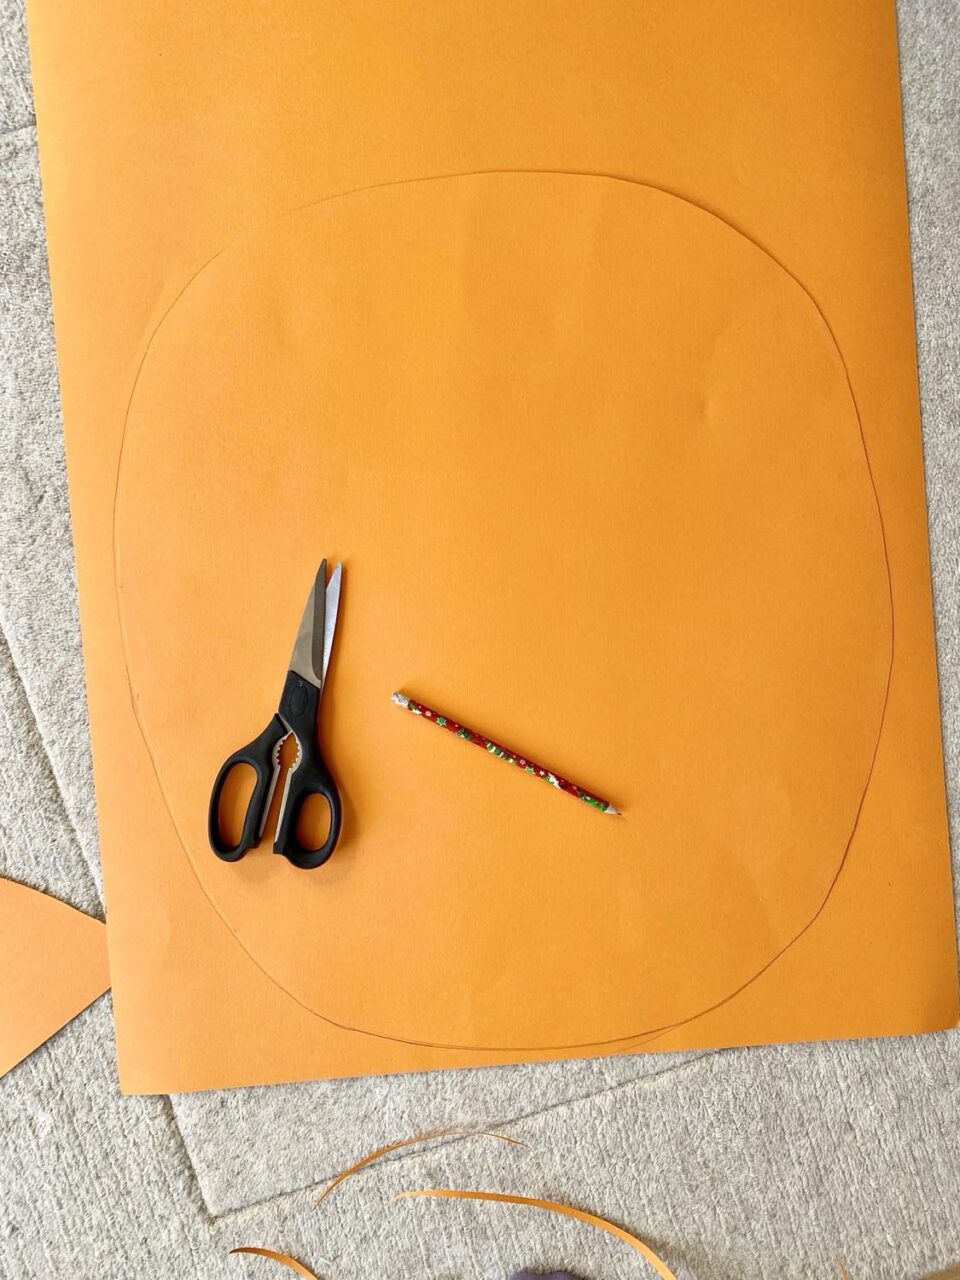 cutting the Mr Tickle body out of the orange card